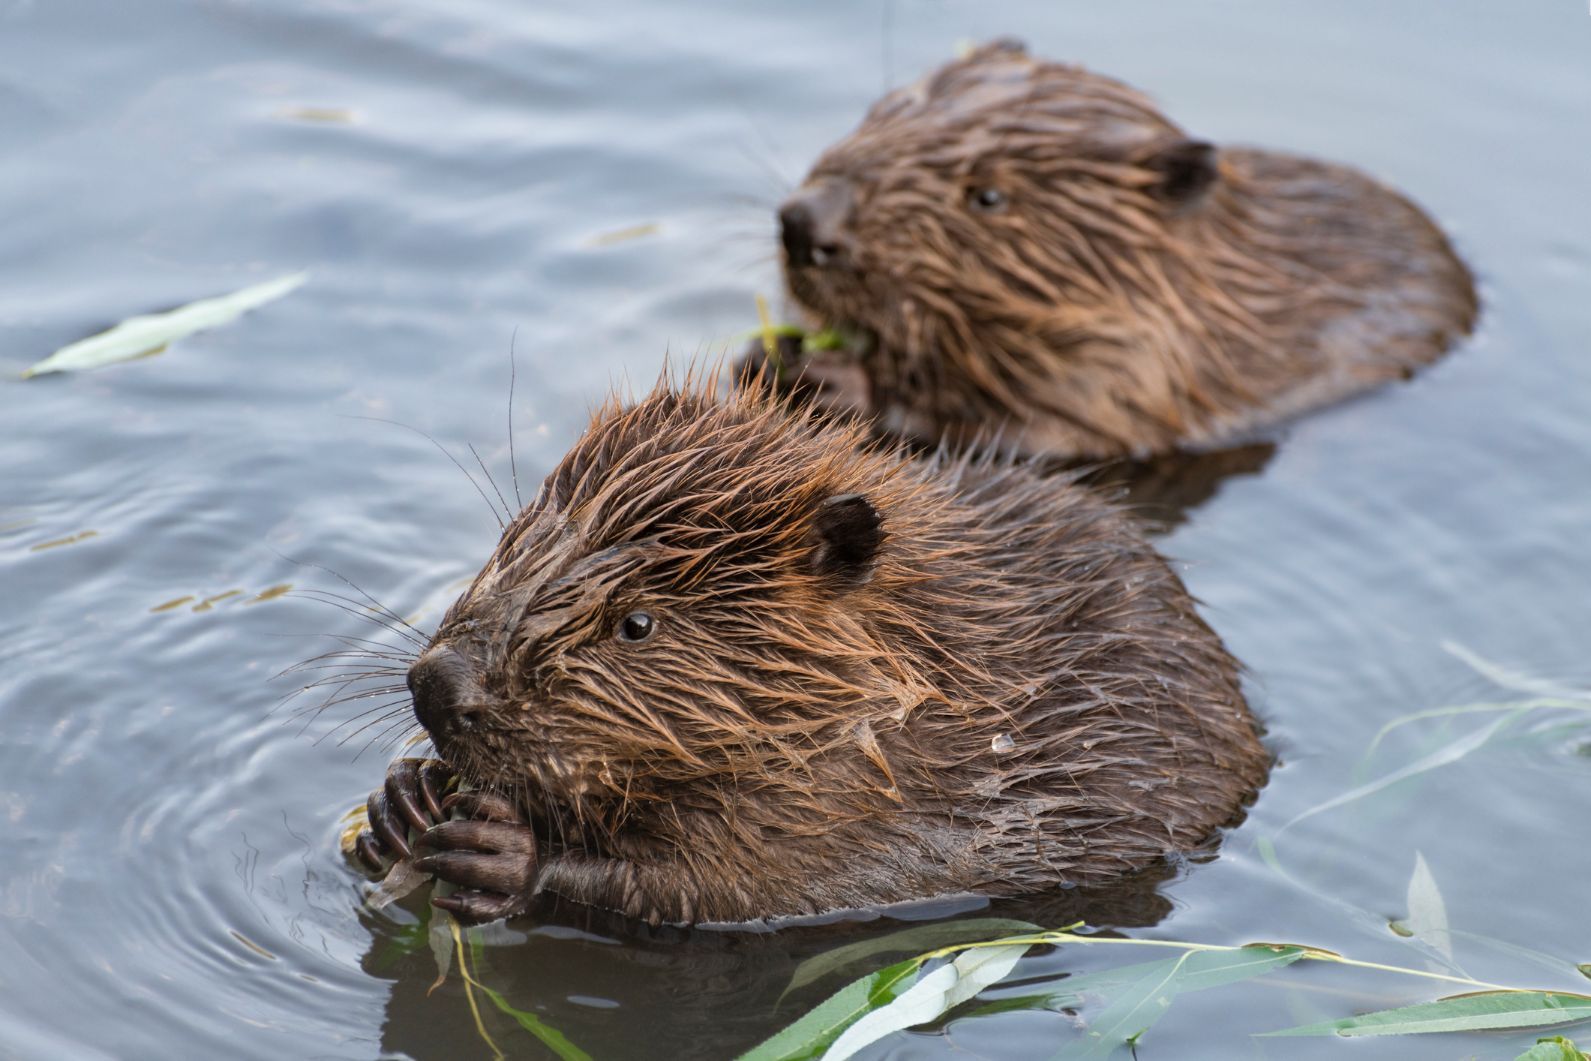 Two beavers eat a reed while submerged in the water.